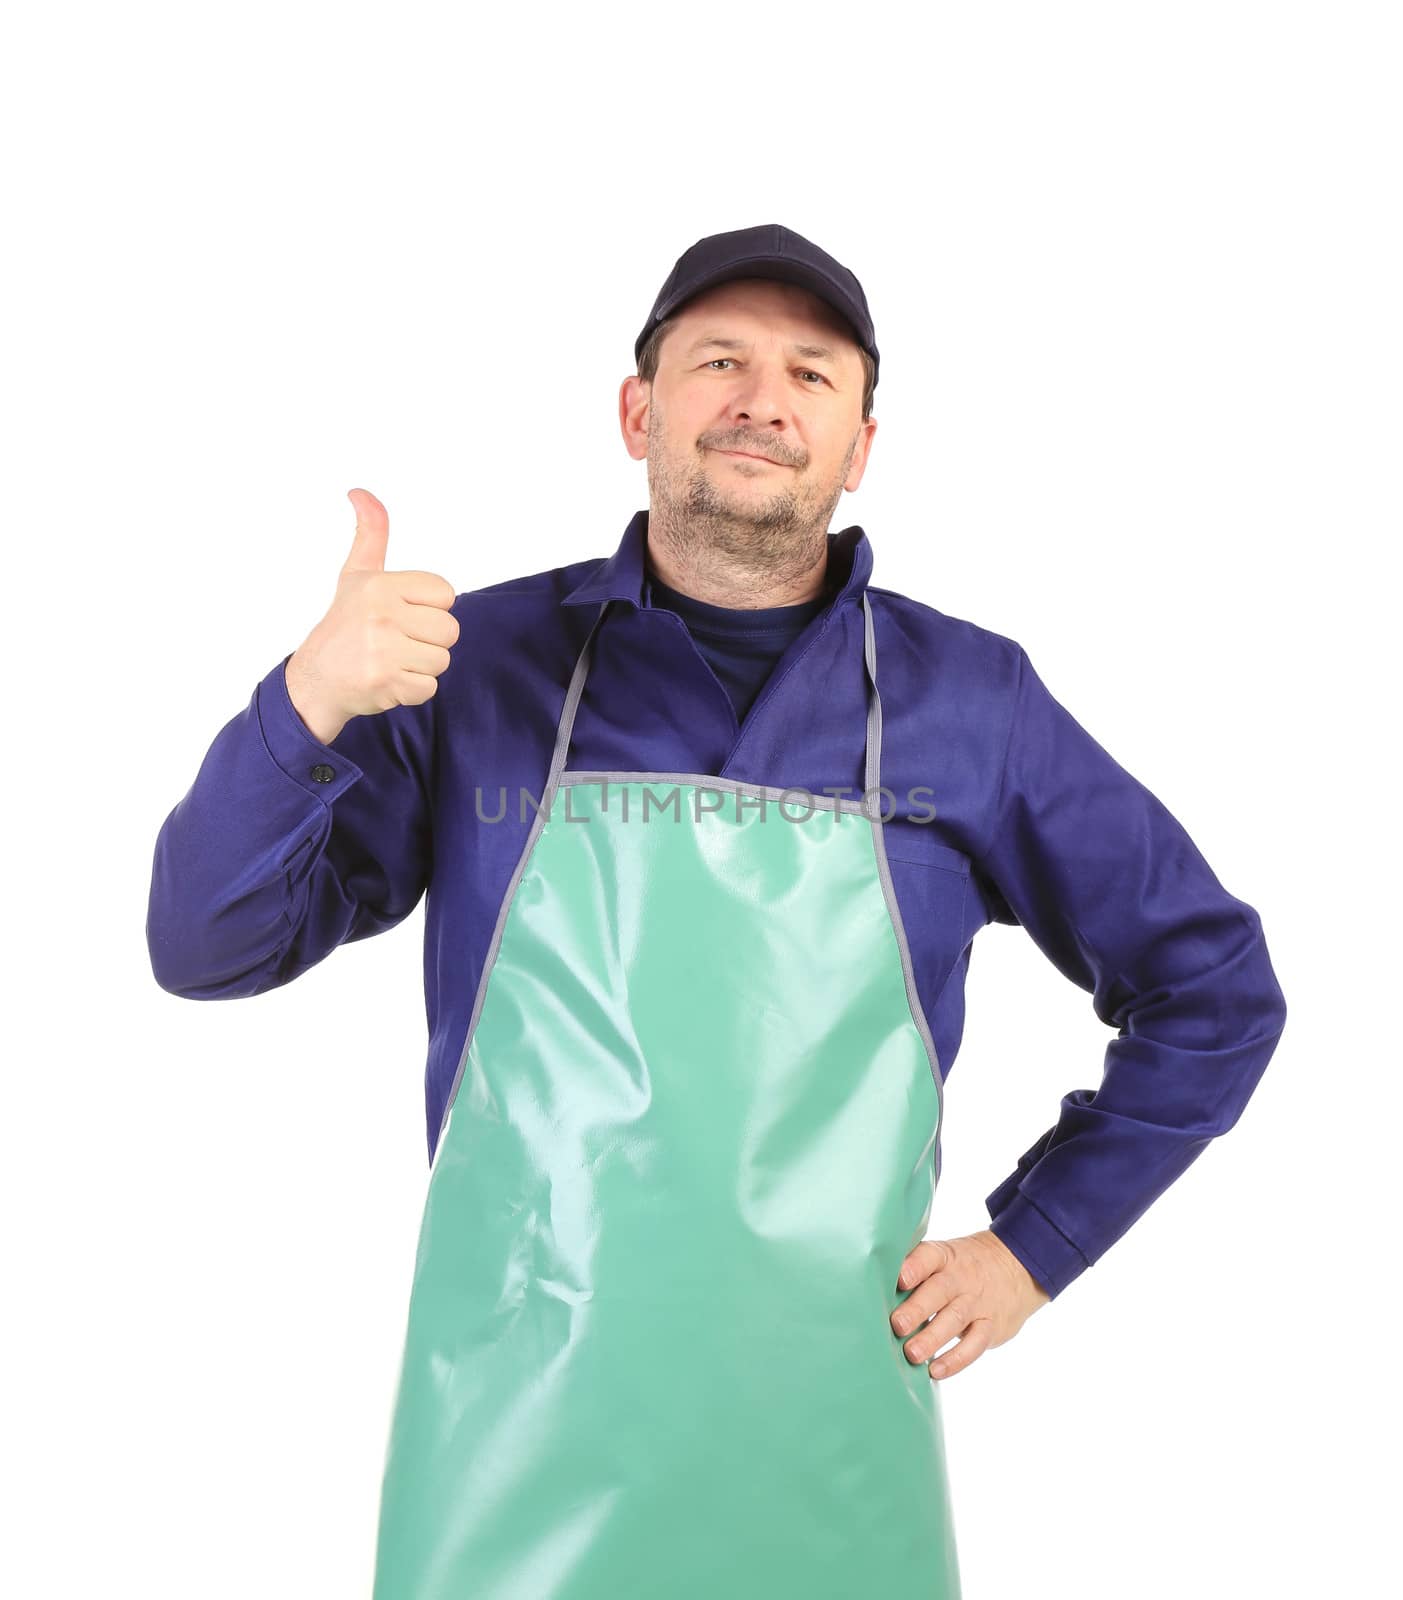 Smiling man dressed in apron. Isolated on a white background.